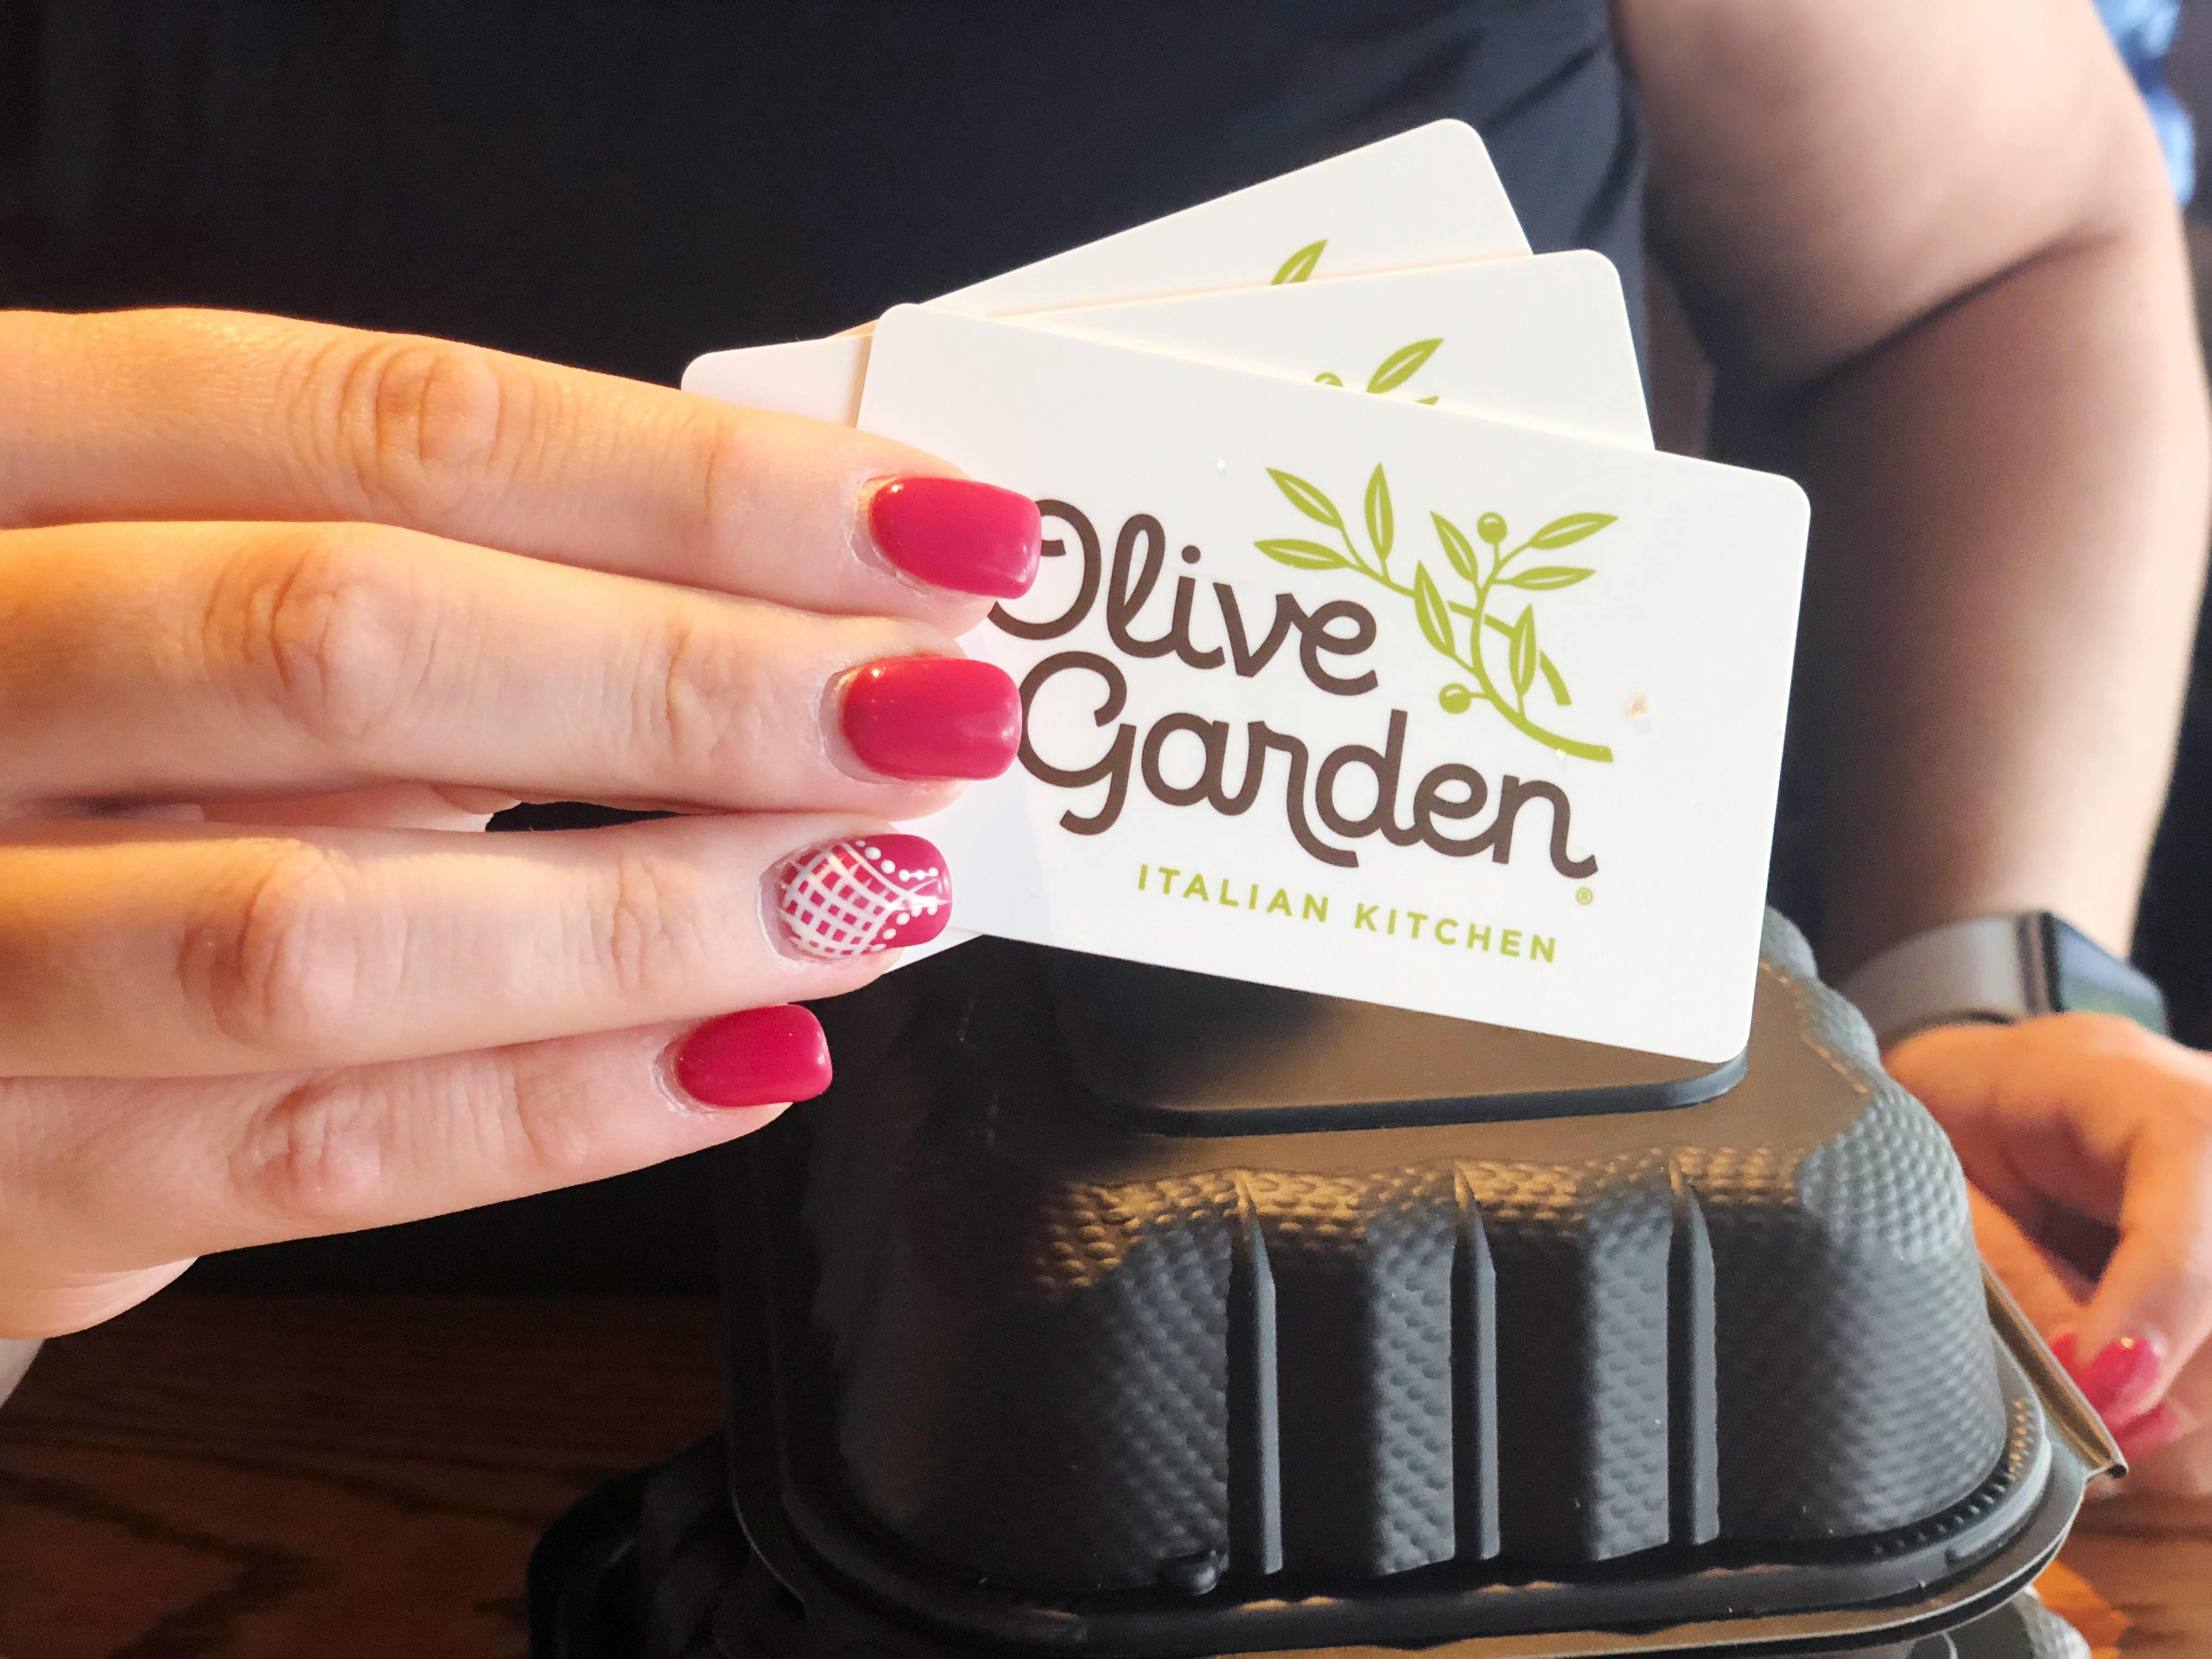 A person holding olive garden gift cards.